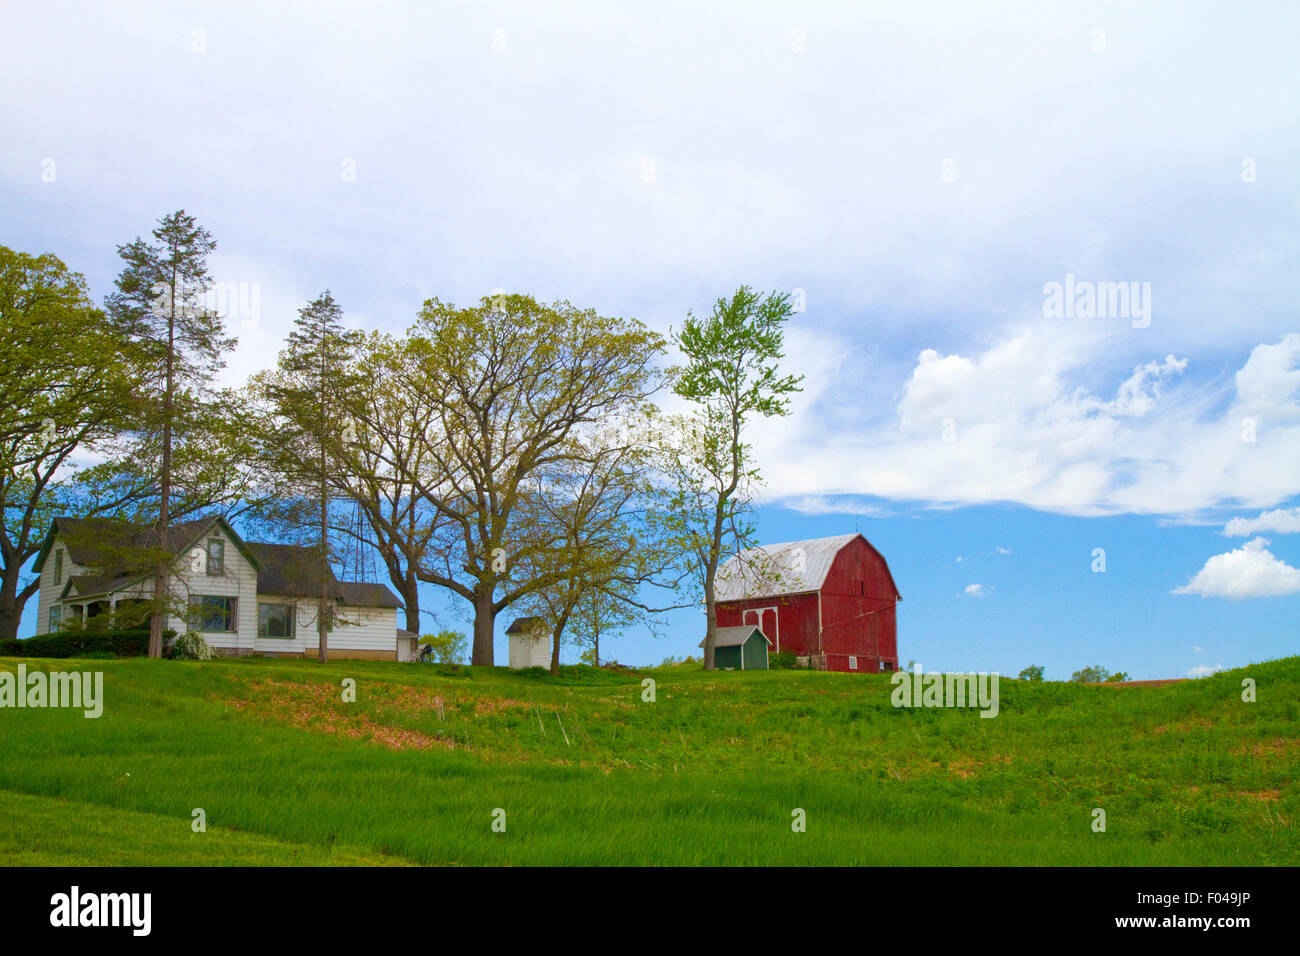 Alfalfa field with red barn and farm house in rural Allegan County, Michigan, USA. Stock Photo